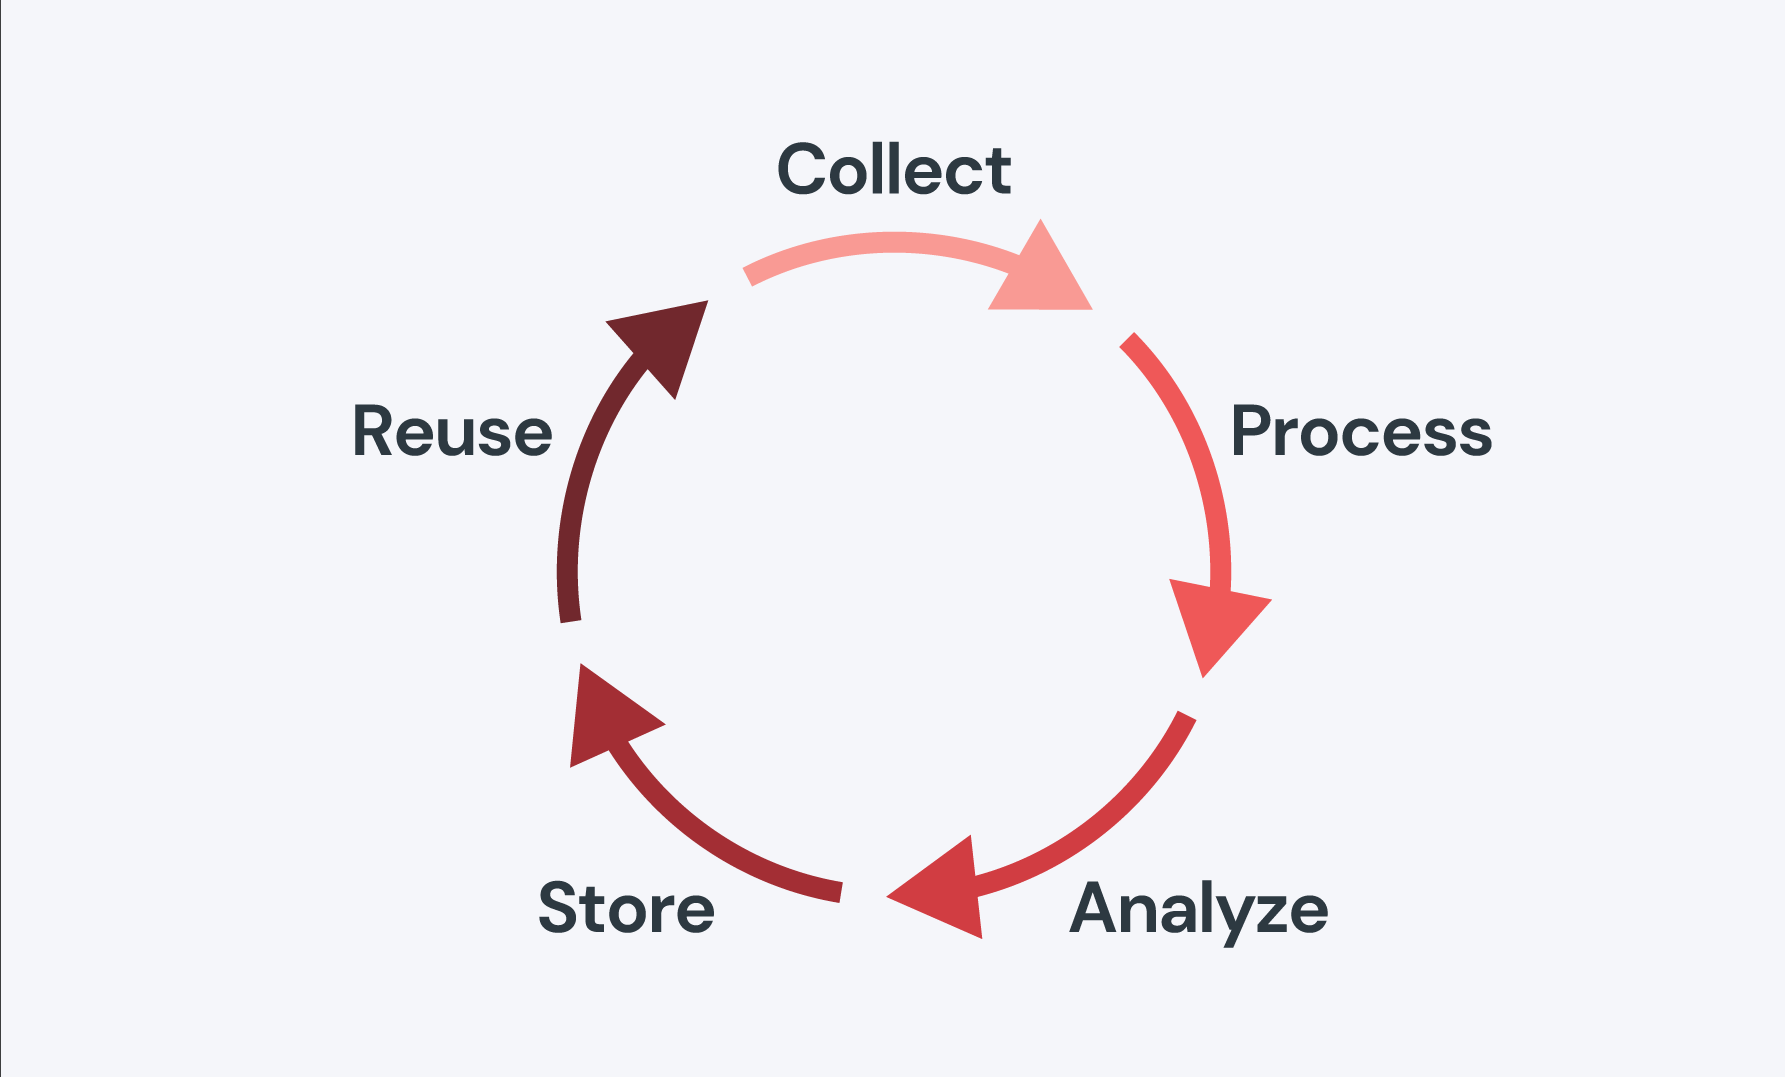 Image shows the data processing cycle